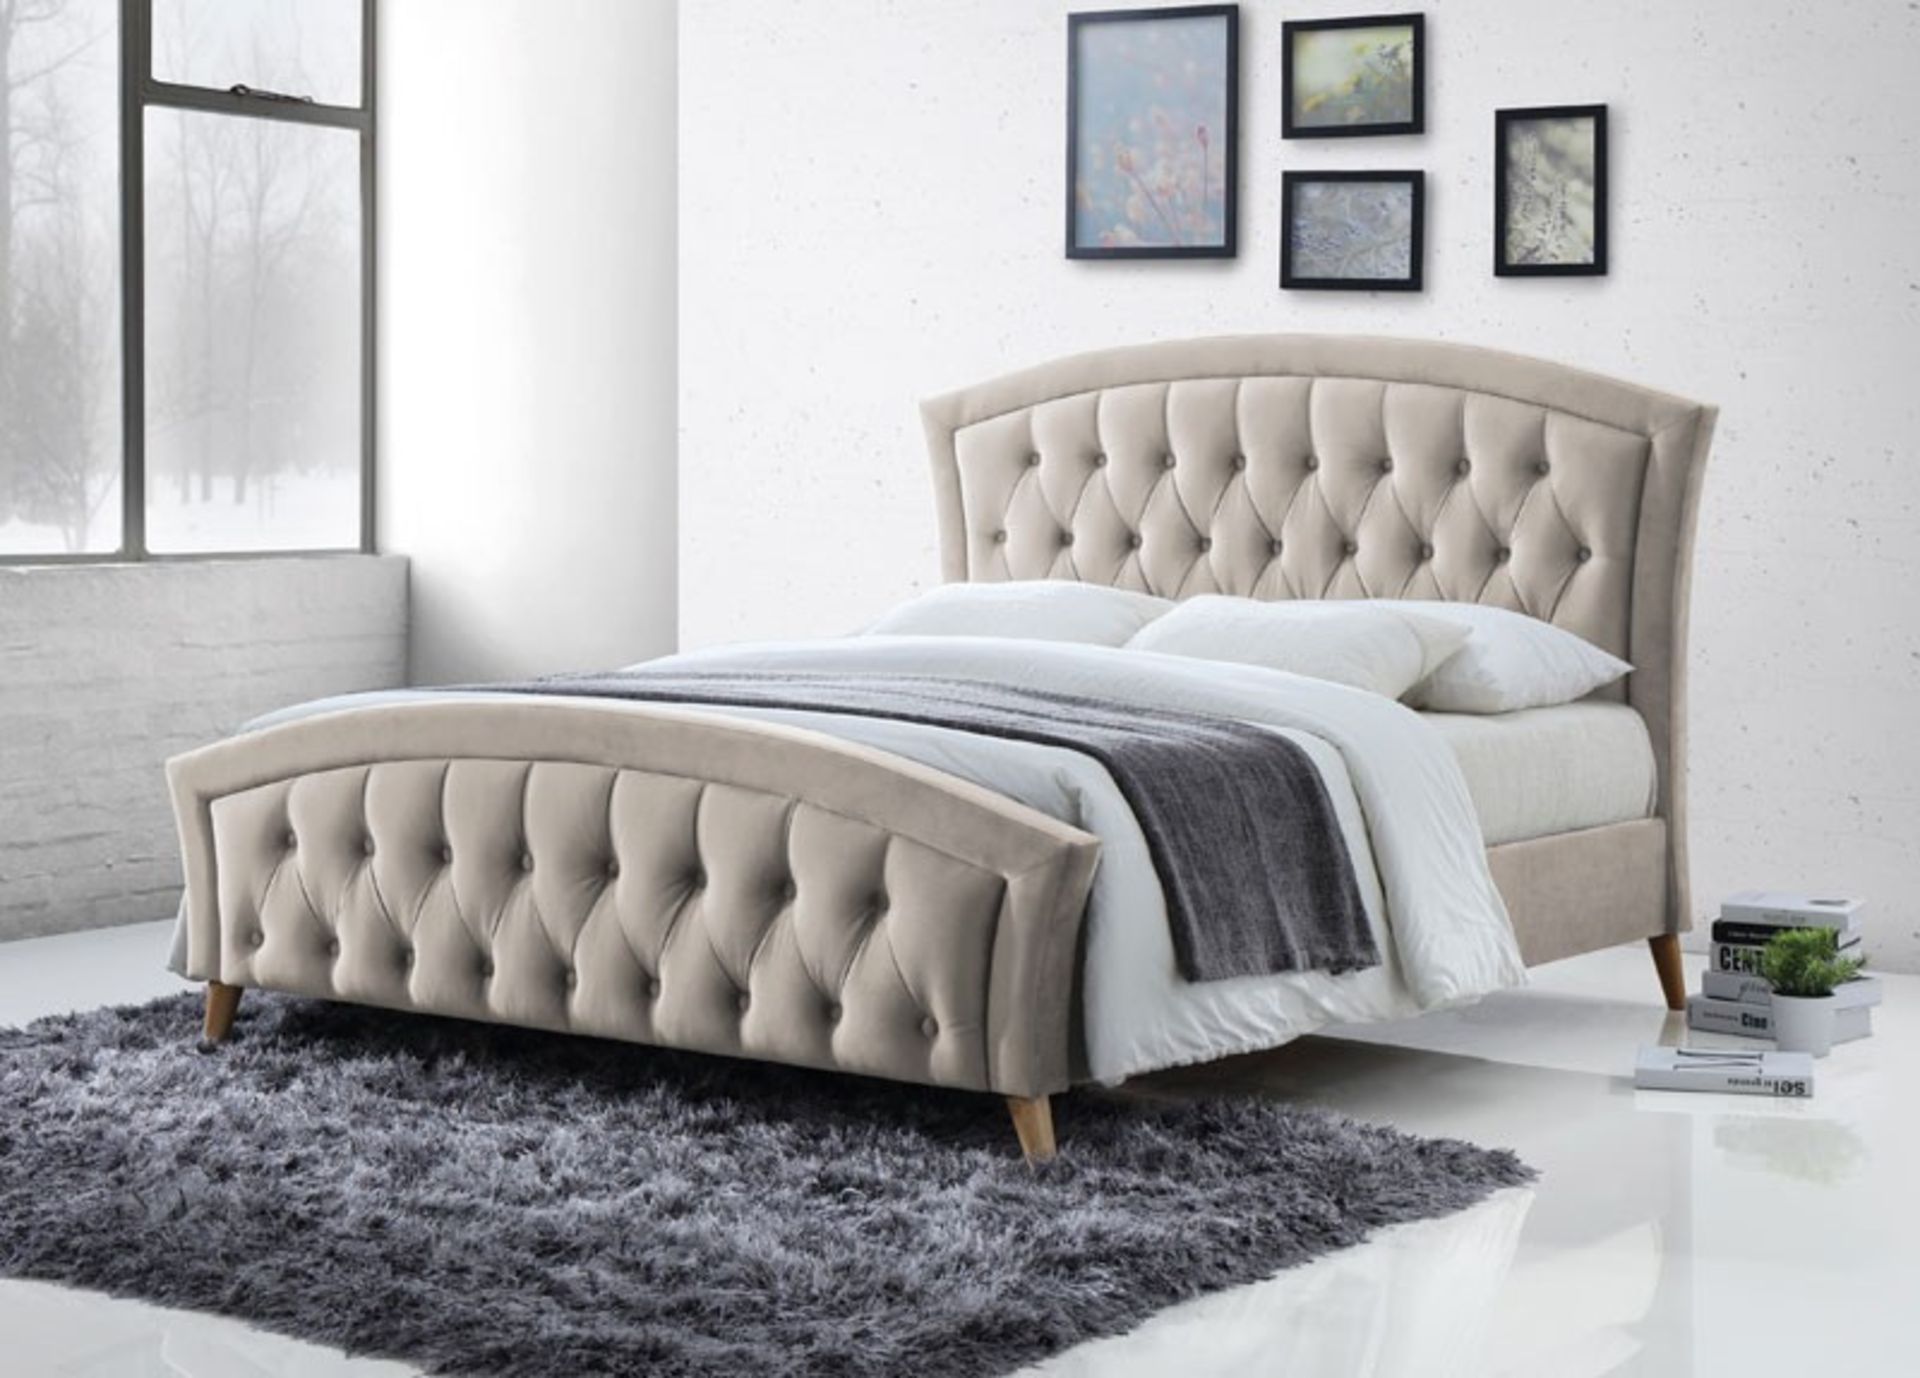 1 GRADE B BOXED KATIE FABRIC DOUBLE BED IN CHAMPAGNE / SIZE 4FT 6" / RRP £453.00 (VIEWING HIGHLY